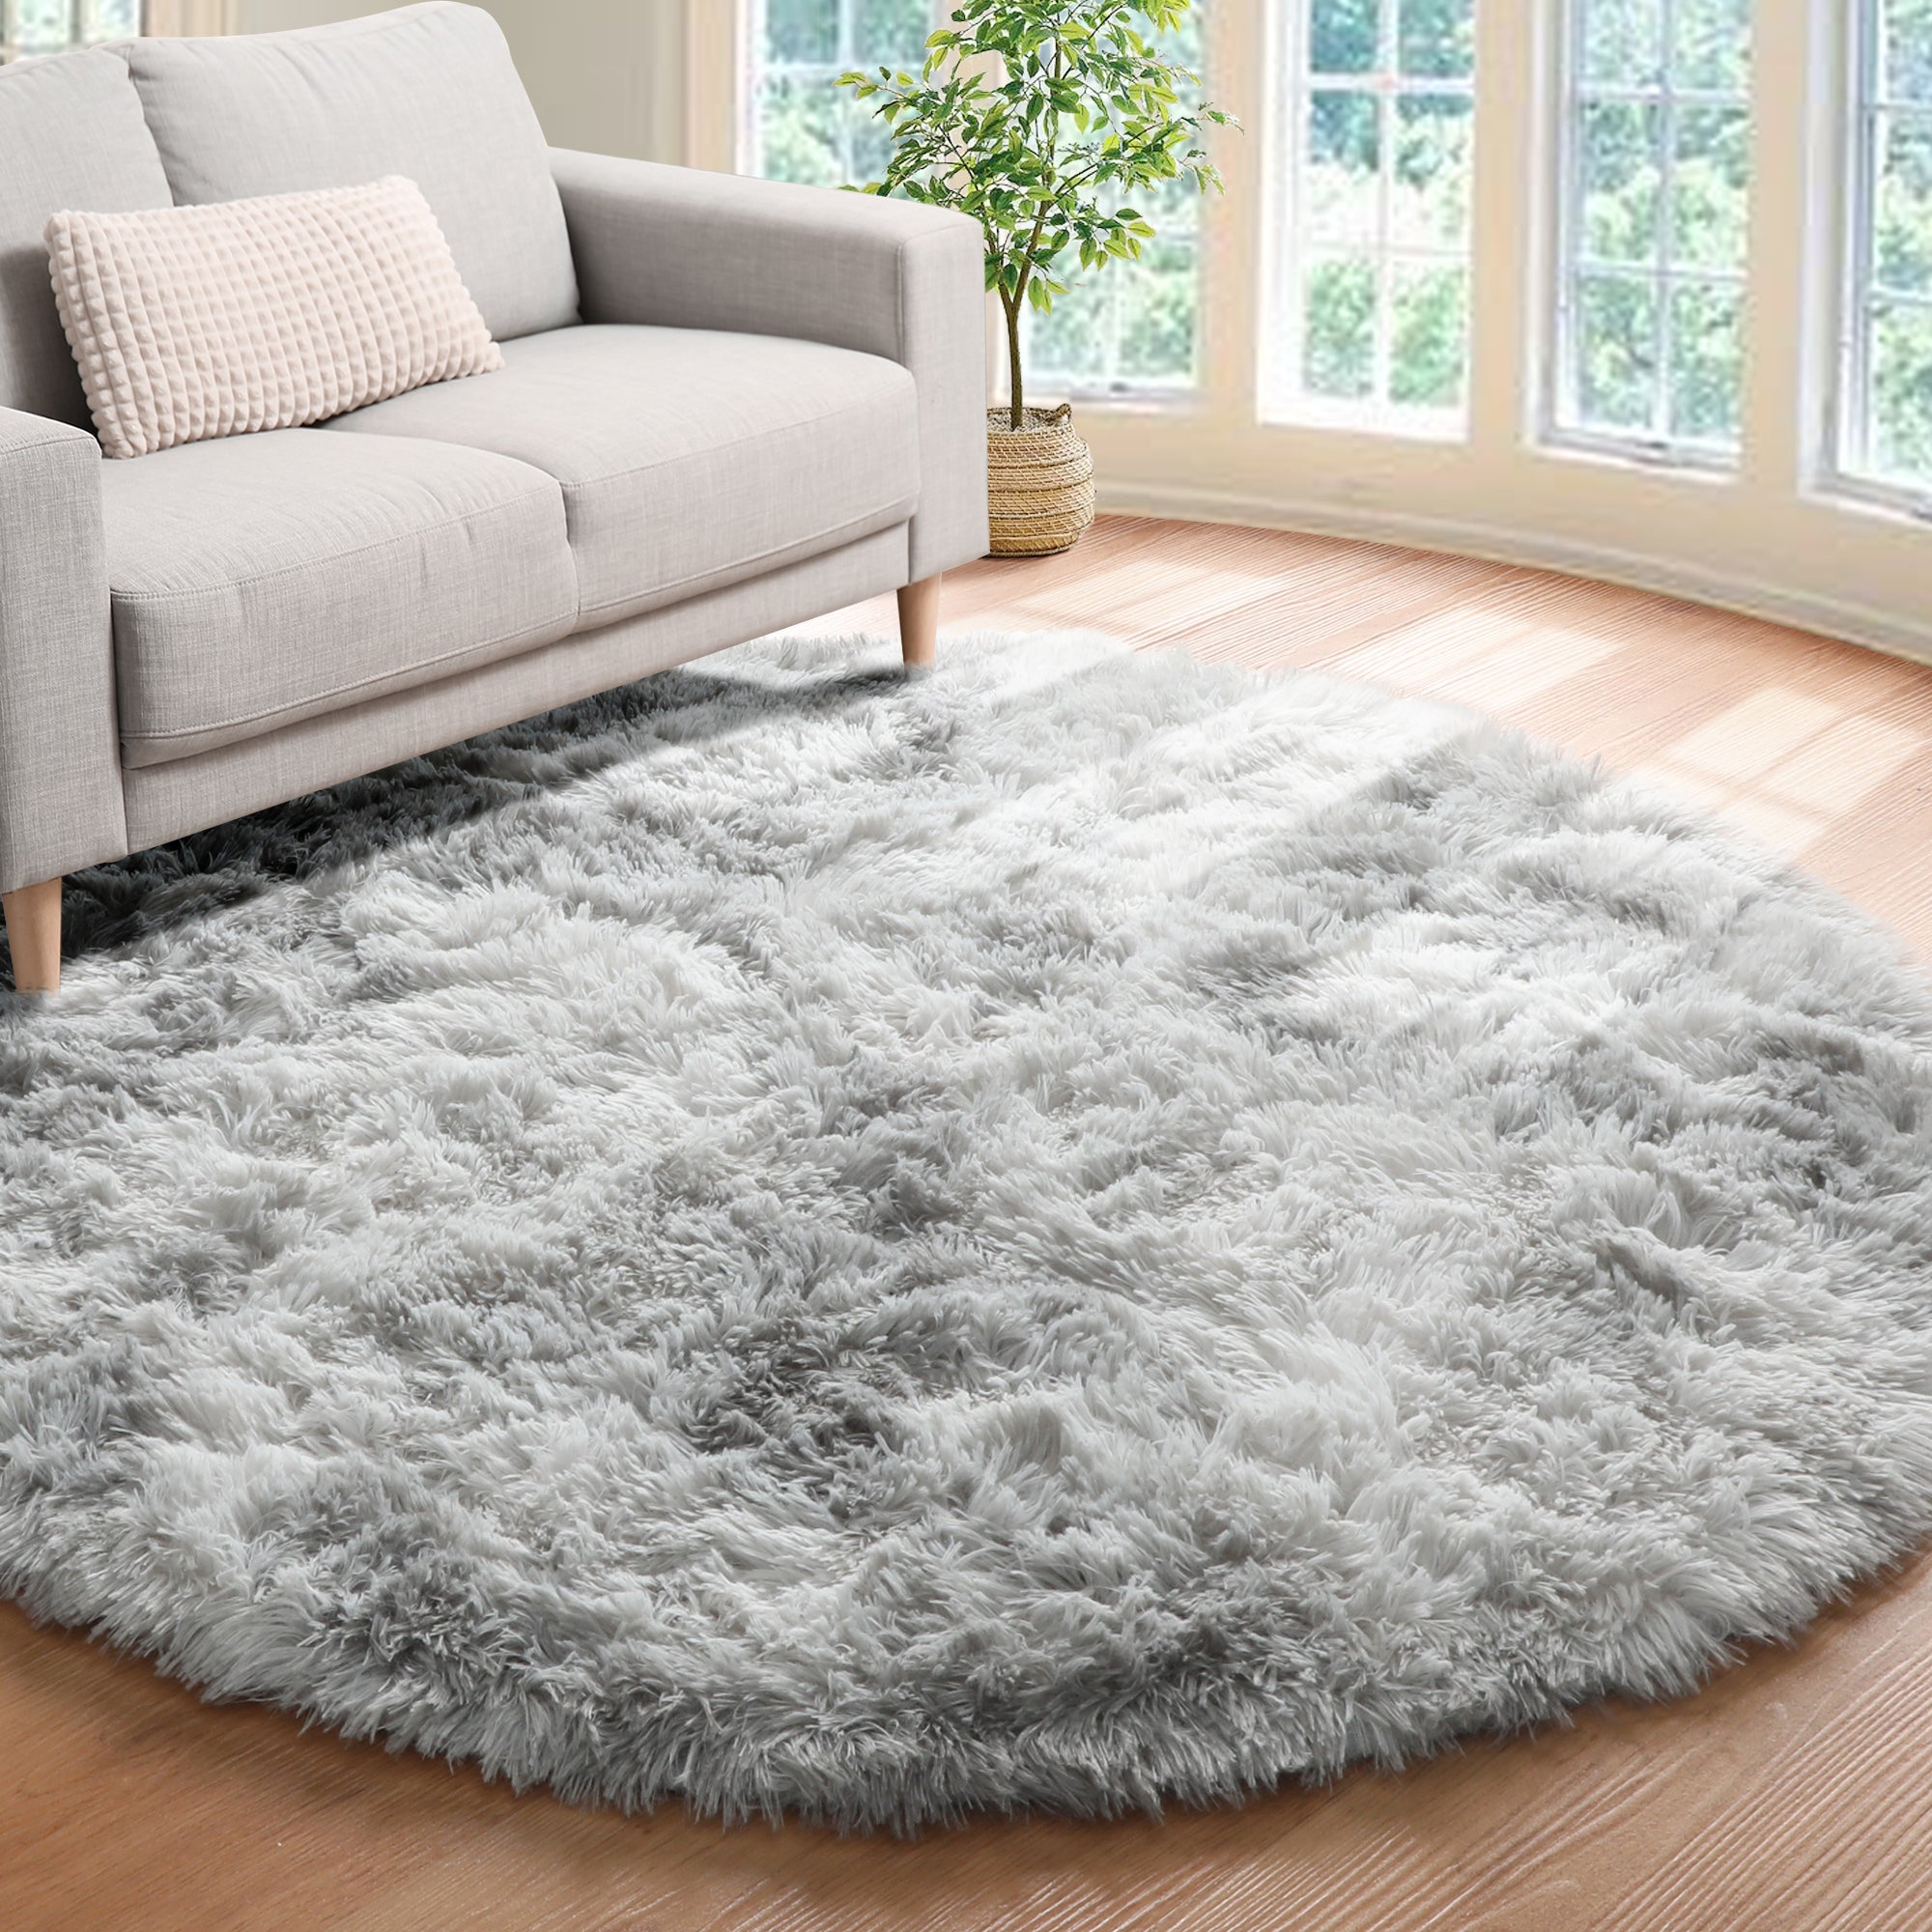 Soft and Fluffy Modern Home Decor Tie-dyed Light Grey Round Rug